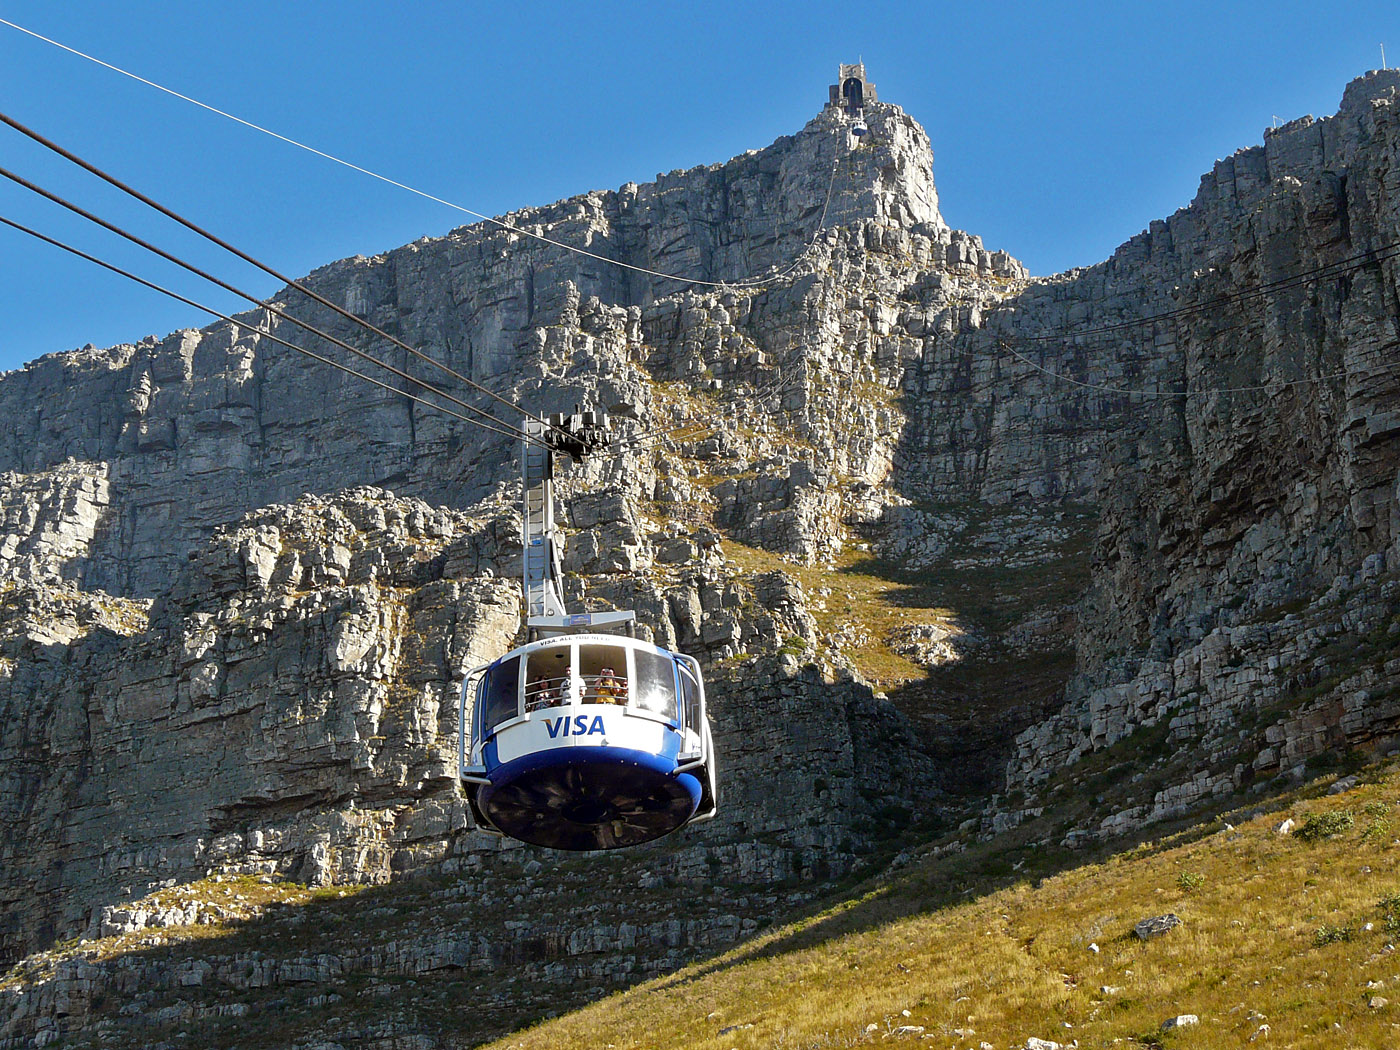 Table Mountain Aerial Cableway, Cape Town